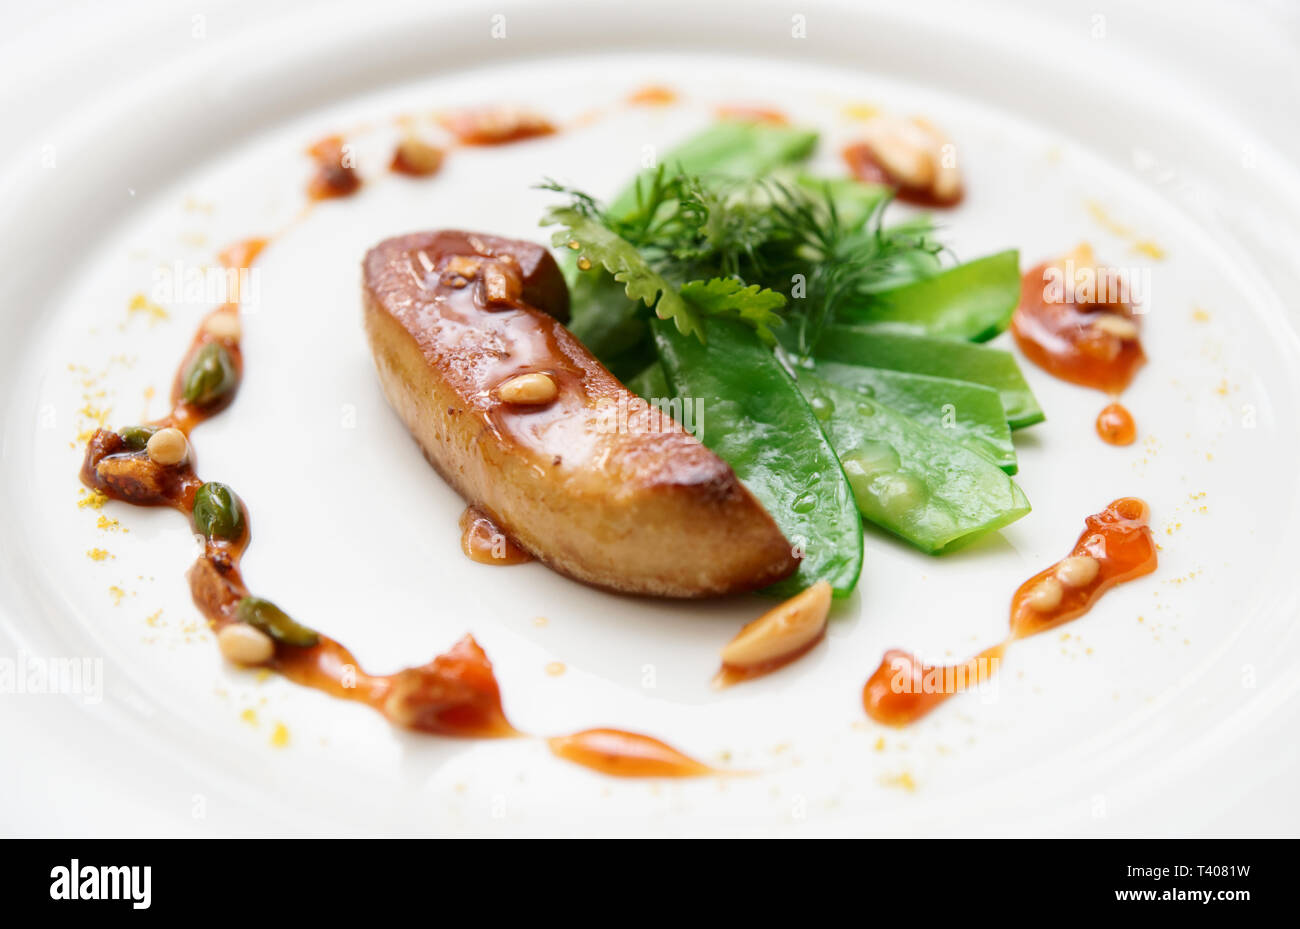 Fried foie gras with caramelized nuts and vegetables Stock Photo